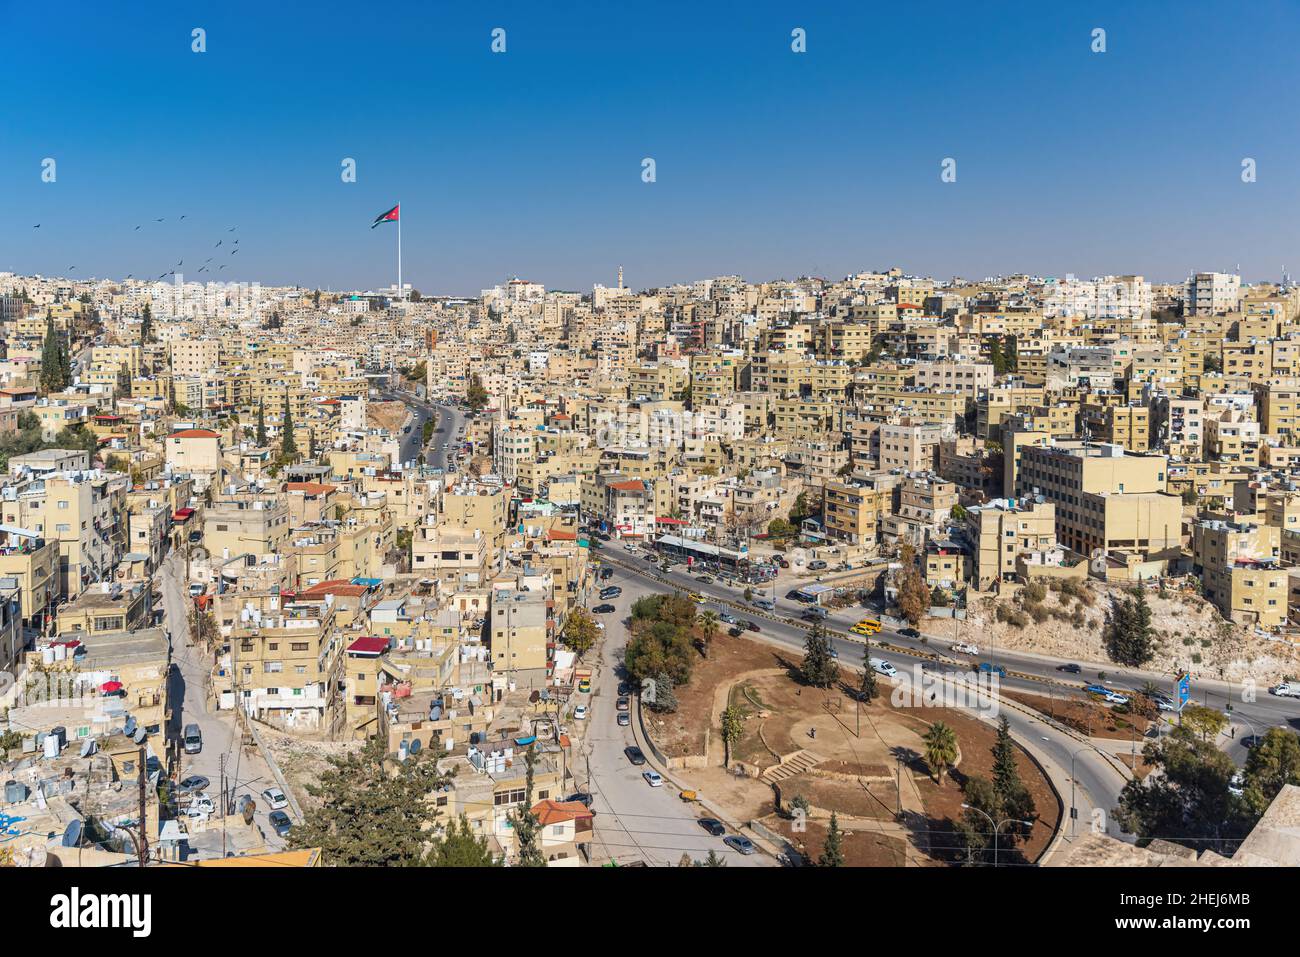 AMMAN, JORDAN - DECEMBER 27, 2021: City view of Amman with the giant  Jordanian flag in the background Stock Photo - Alamy